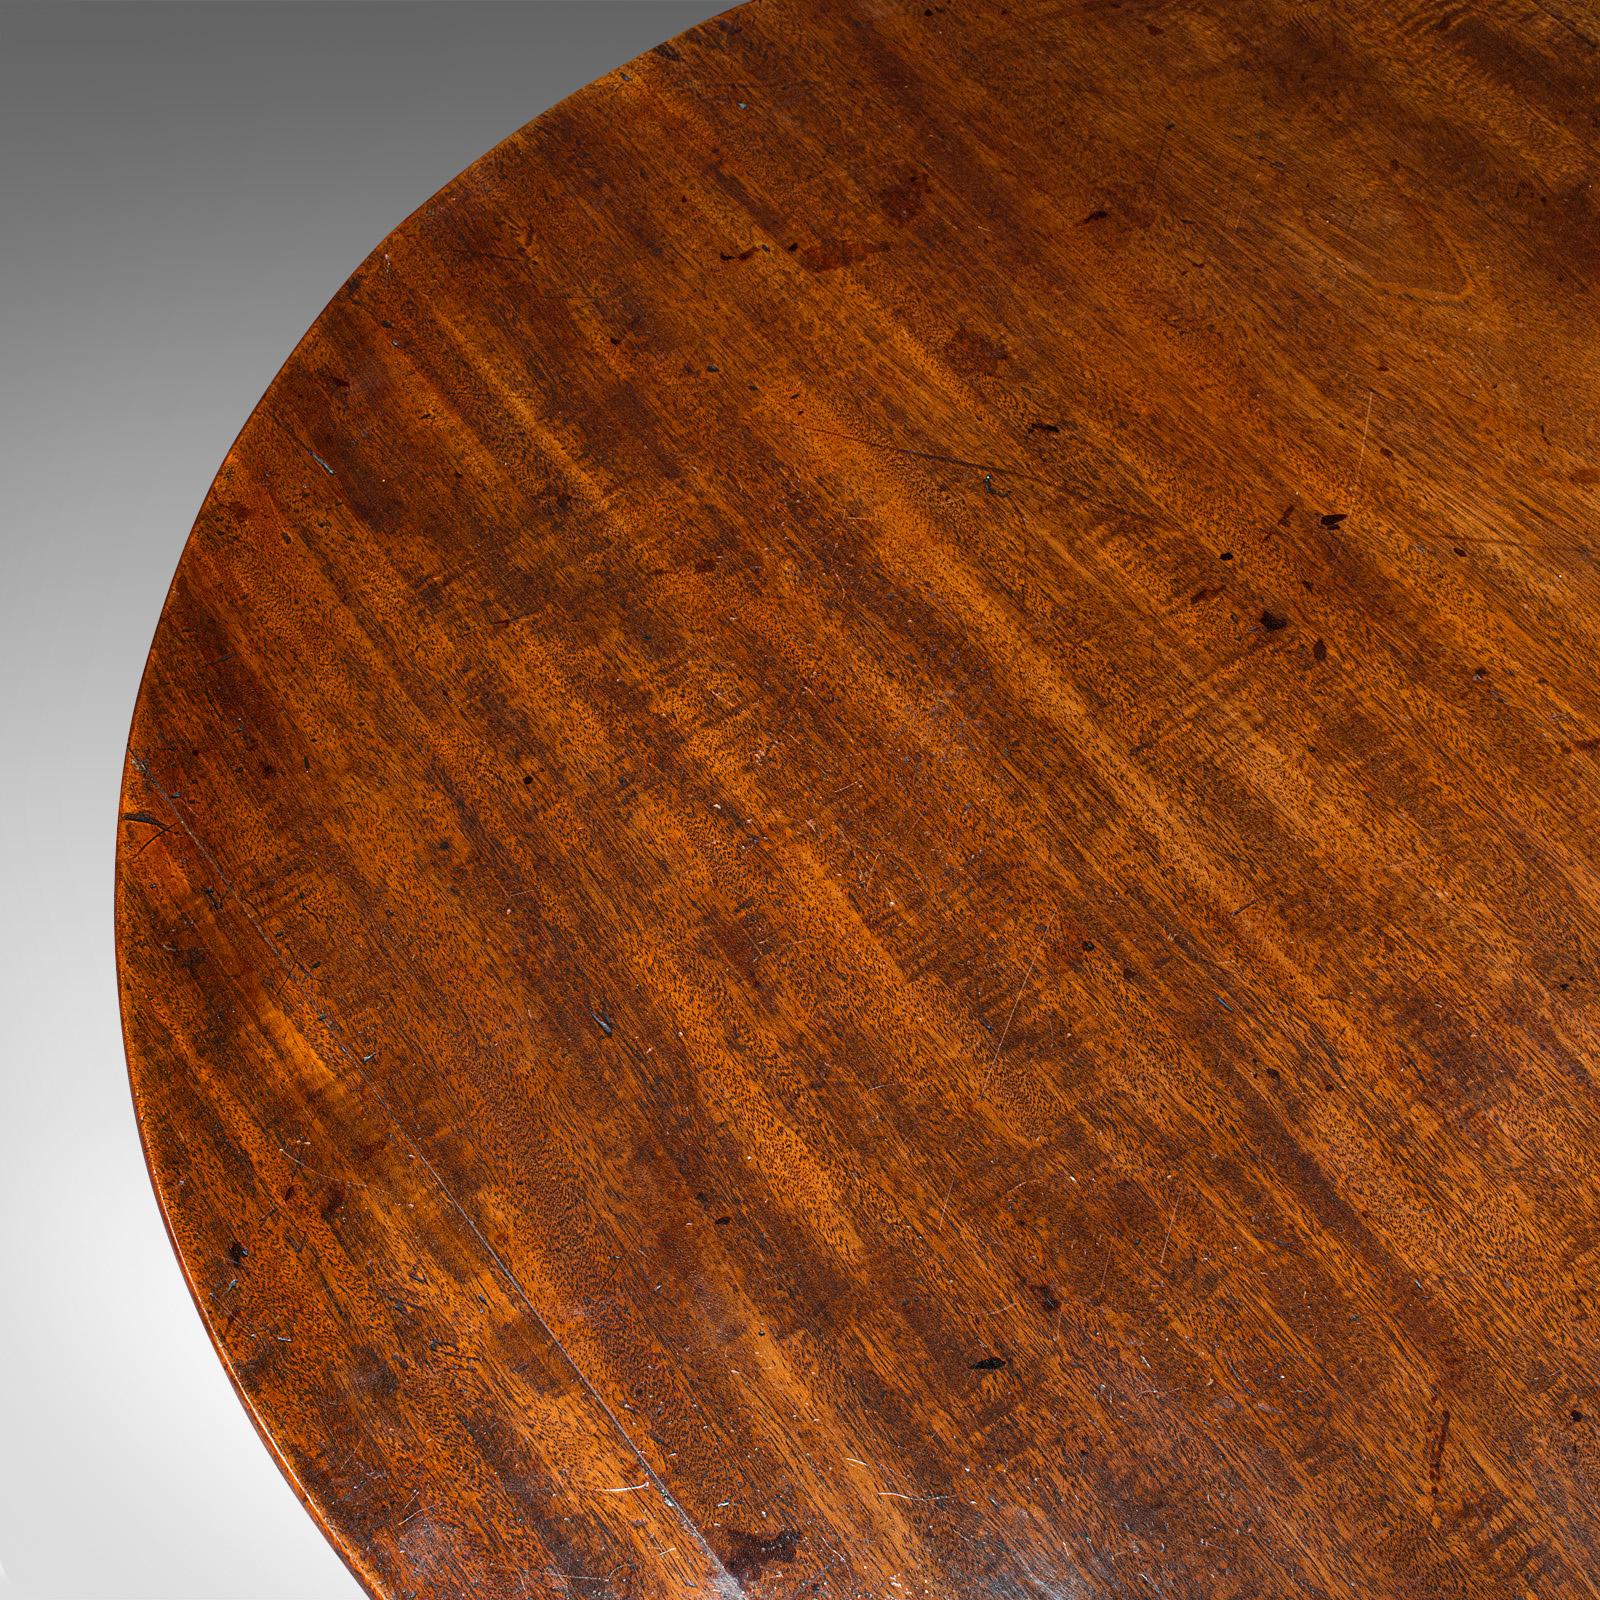 Antique Tilt Top Table, English, Mahogany, Lamp, Wine, Side, Georgian, C.1770 In Good Condition For Sale In Hele, Devon, GB